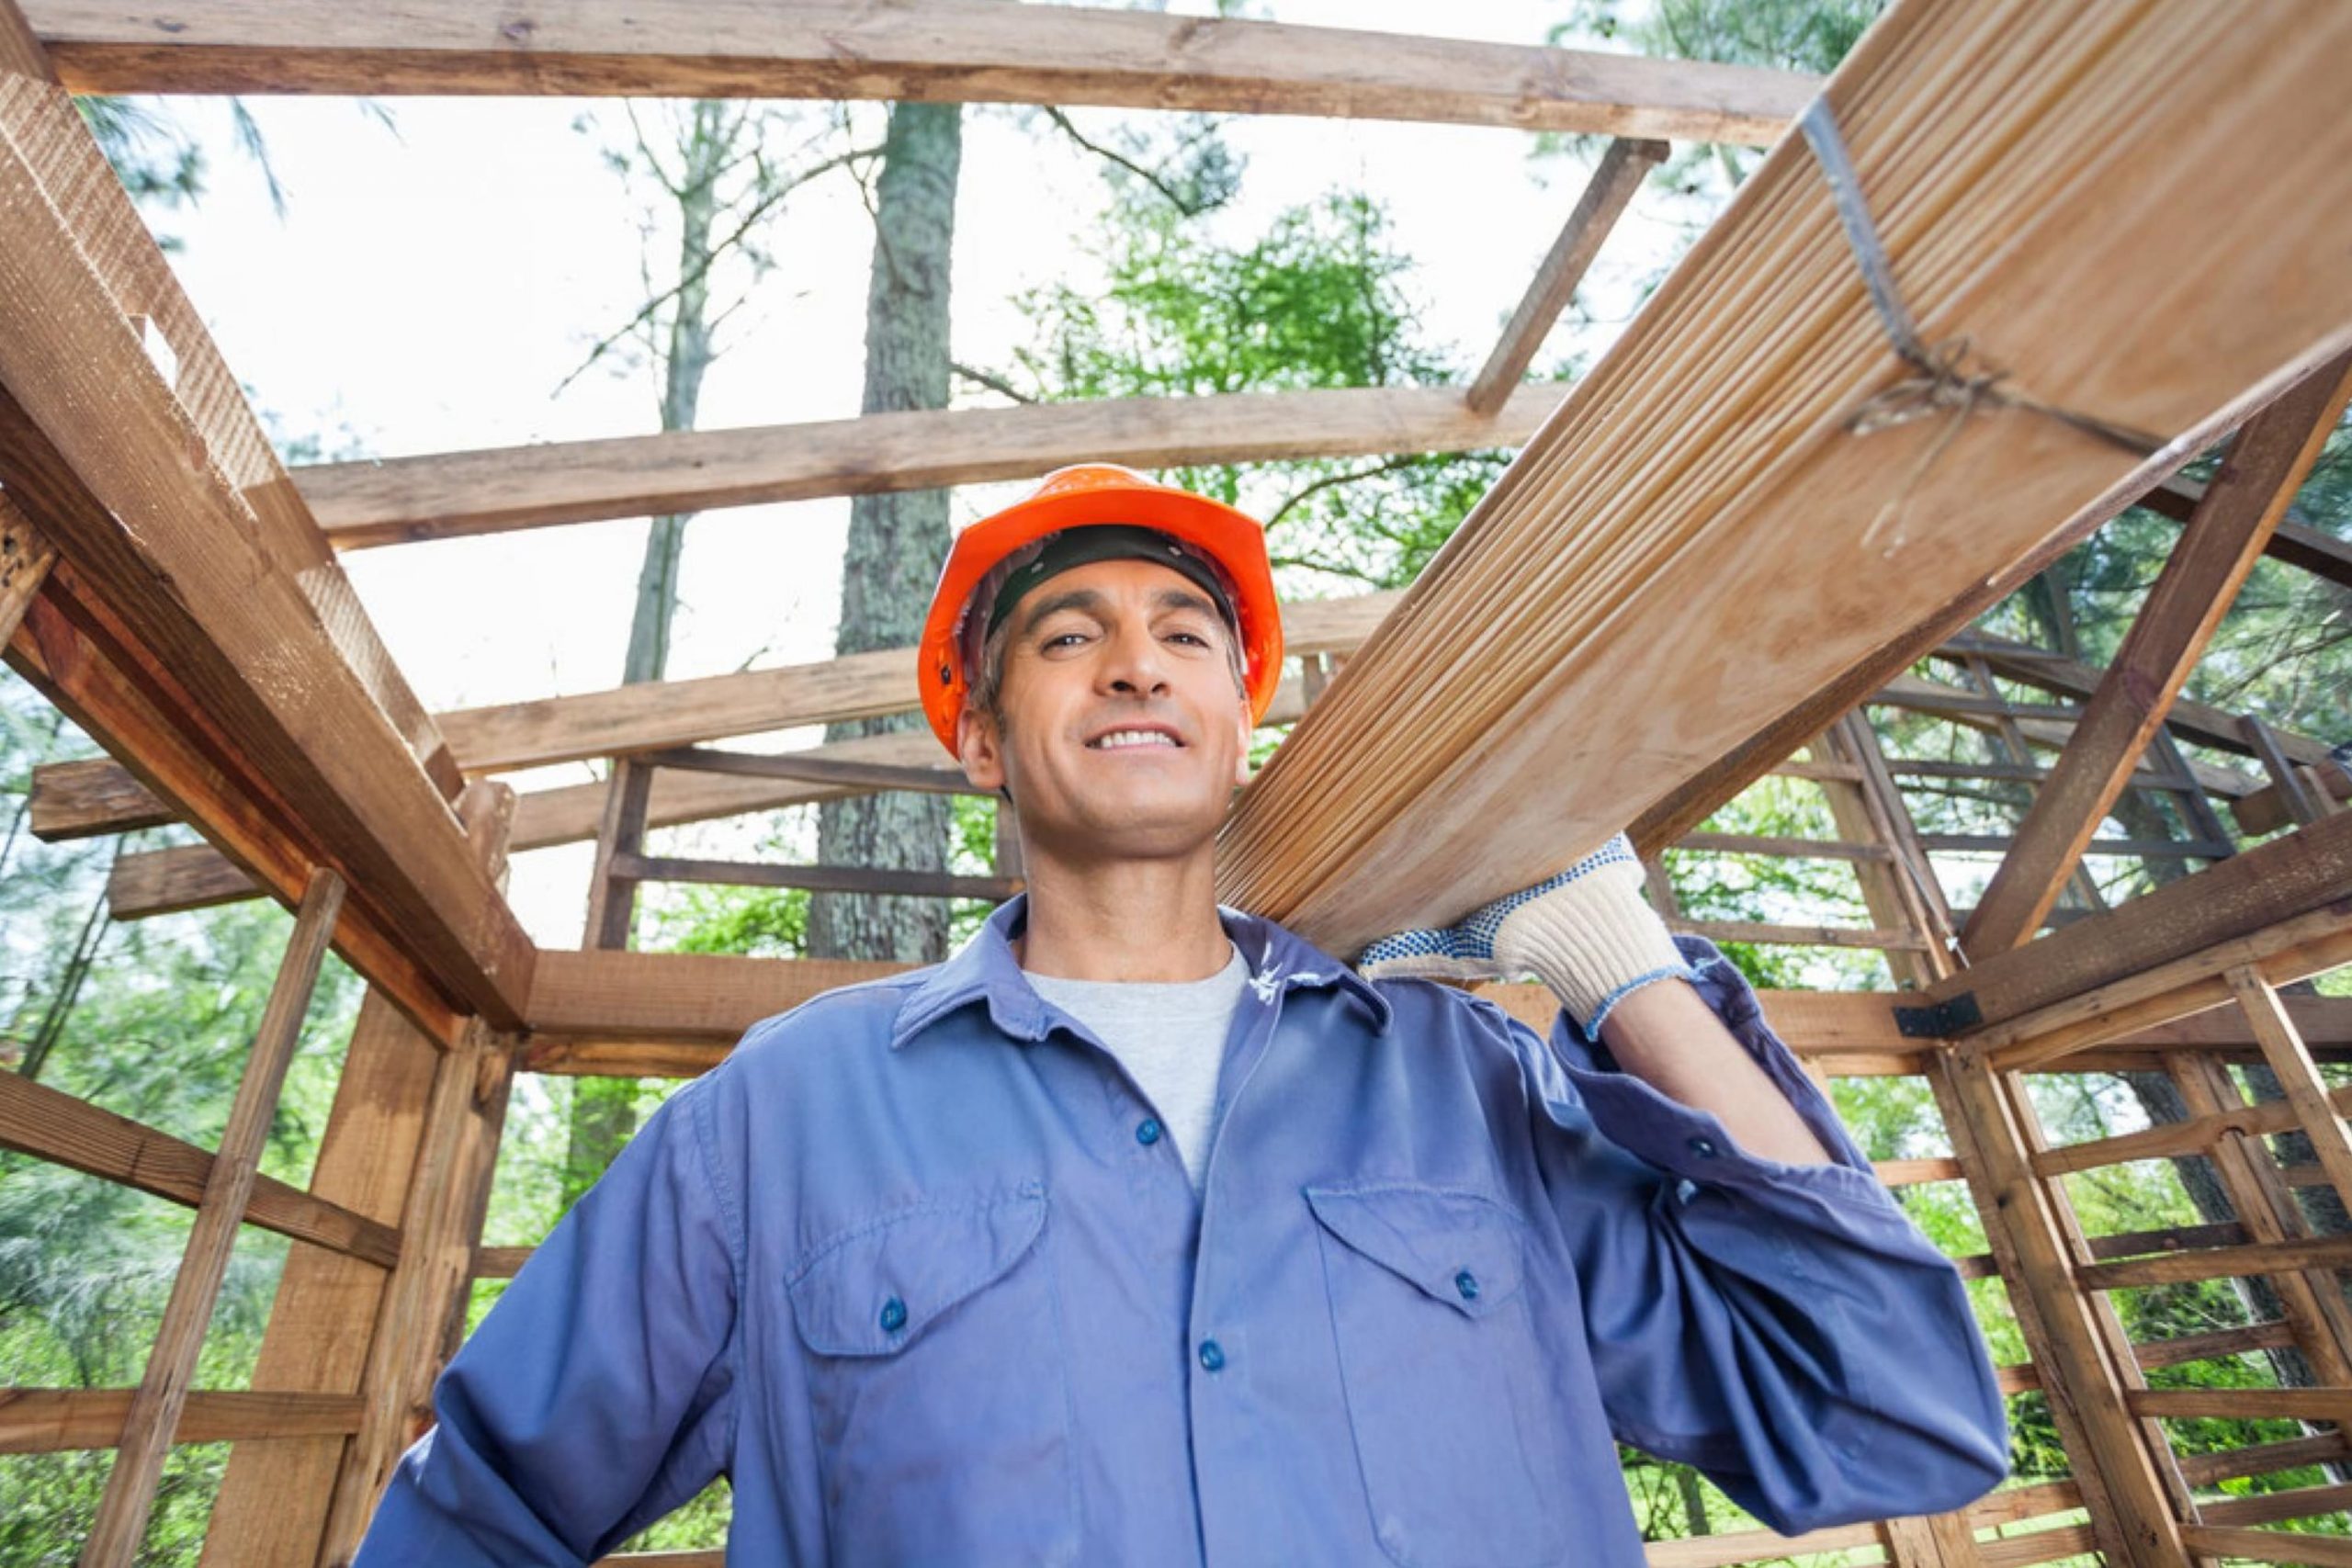 Make Sure You Are Hiring the Best Contractor to Do the Job